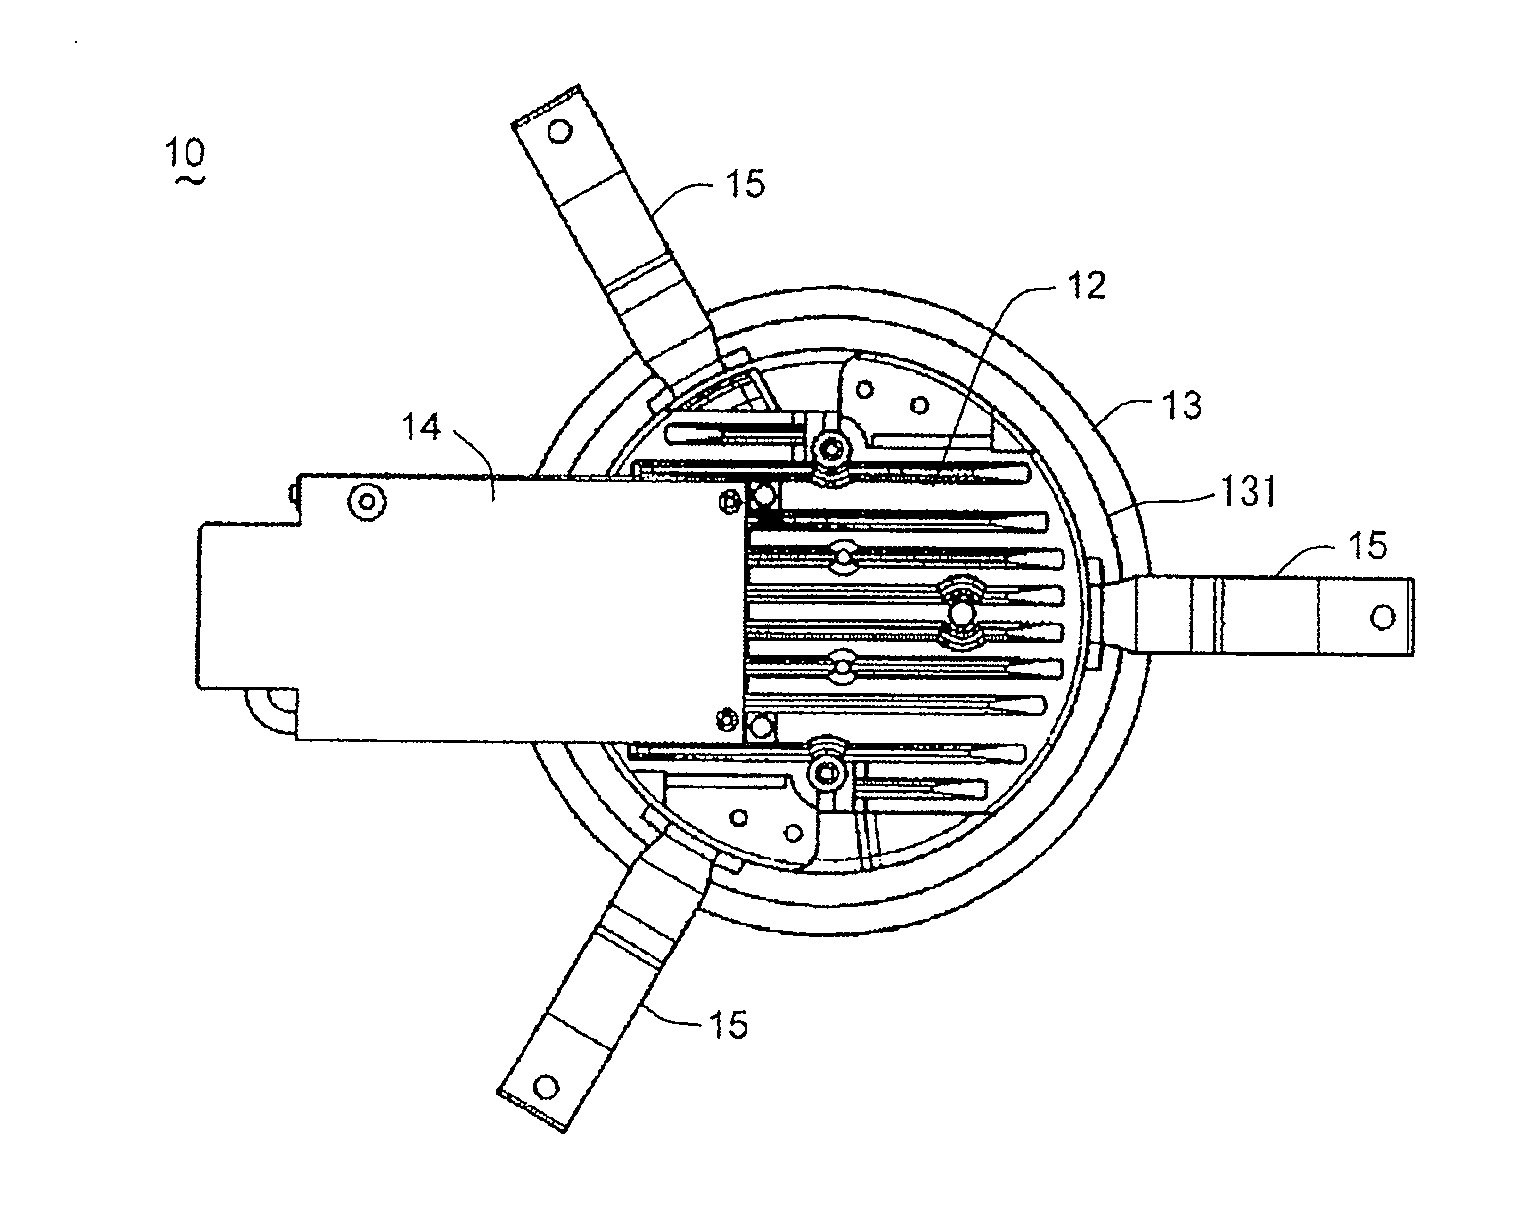 Lighting fixture for visible light communication and visible-light-communication system with same